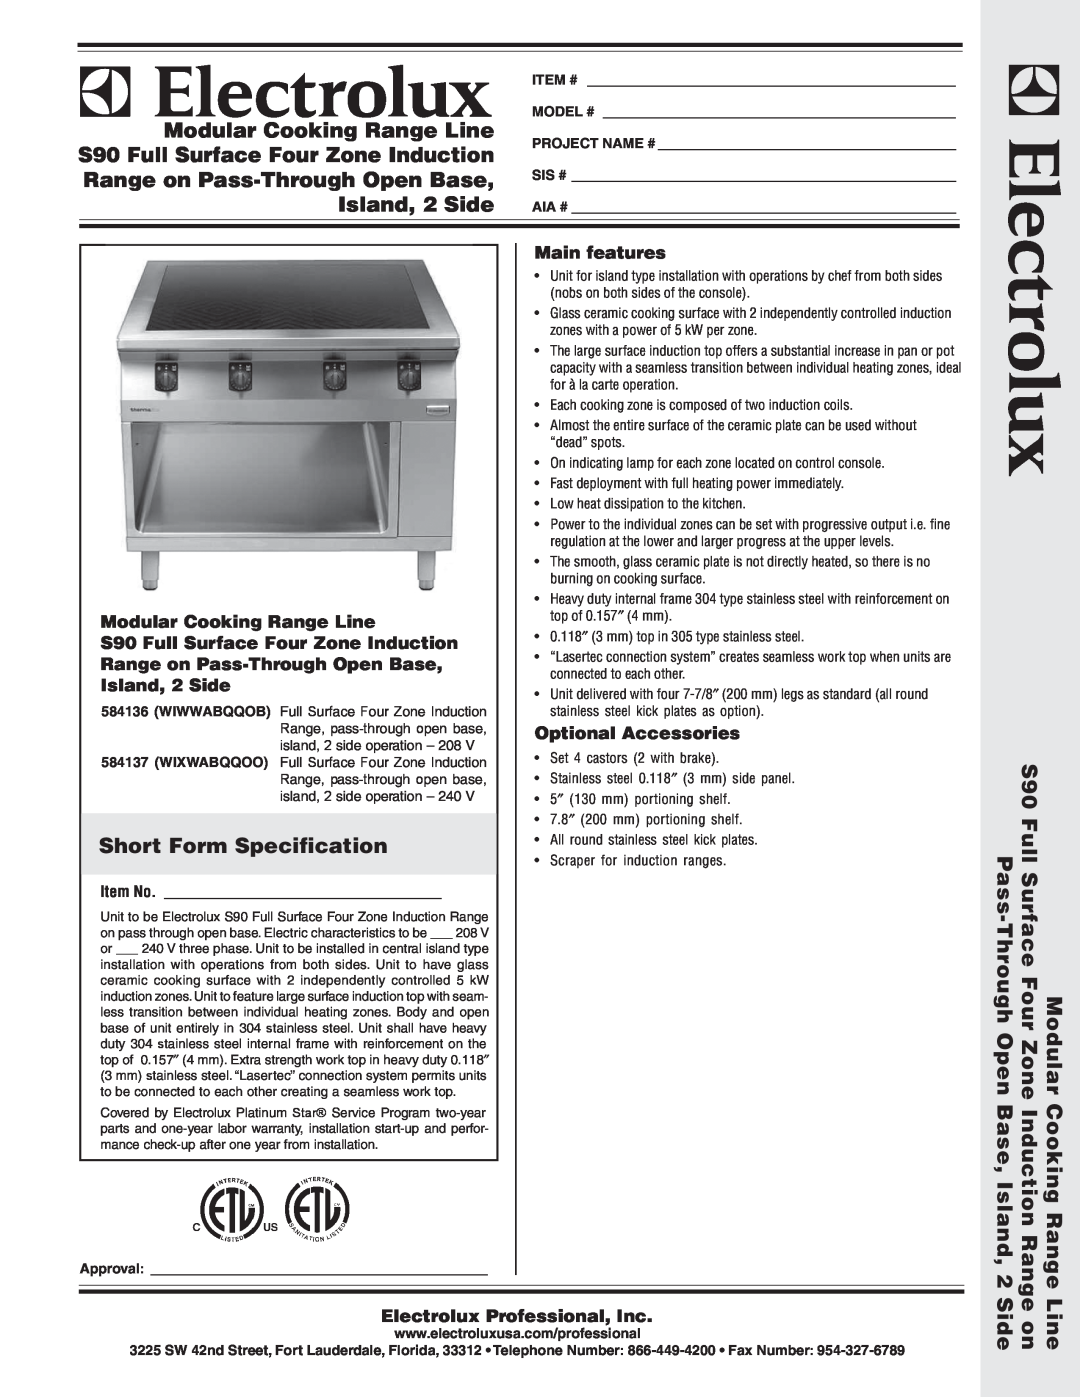 Electrolux 584136 warranty Main features, Modular Cooking Range Line, S90 Full Surface Four Zone Induction, Island, 2 Side 